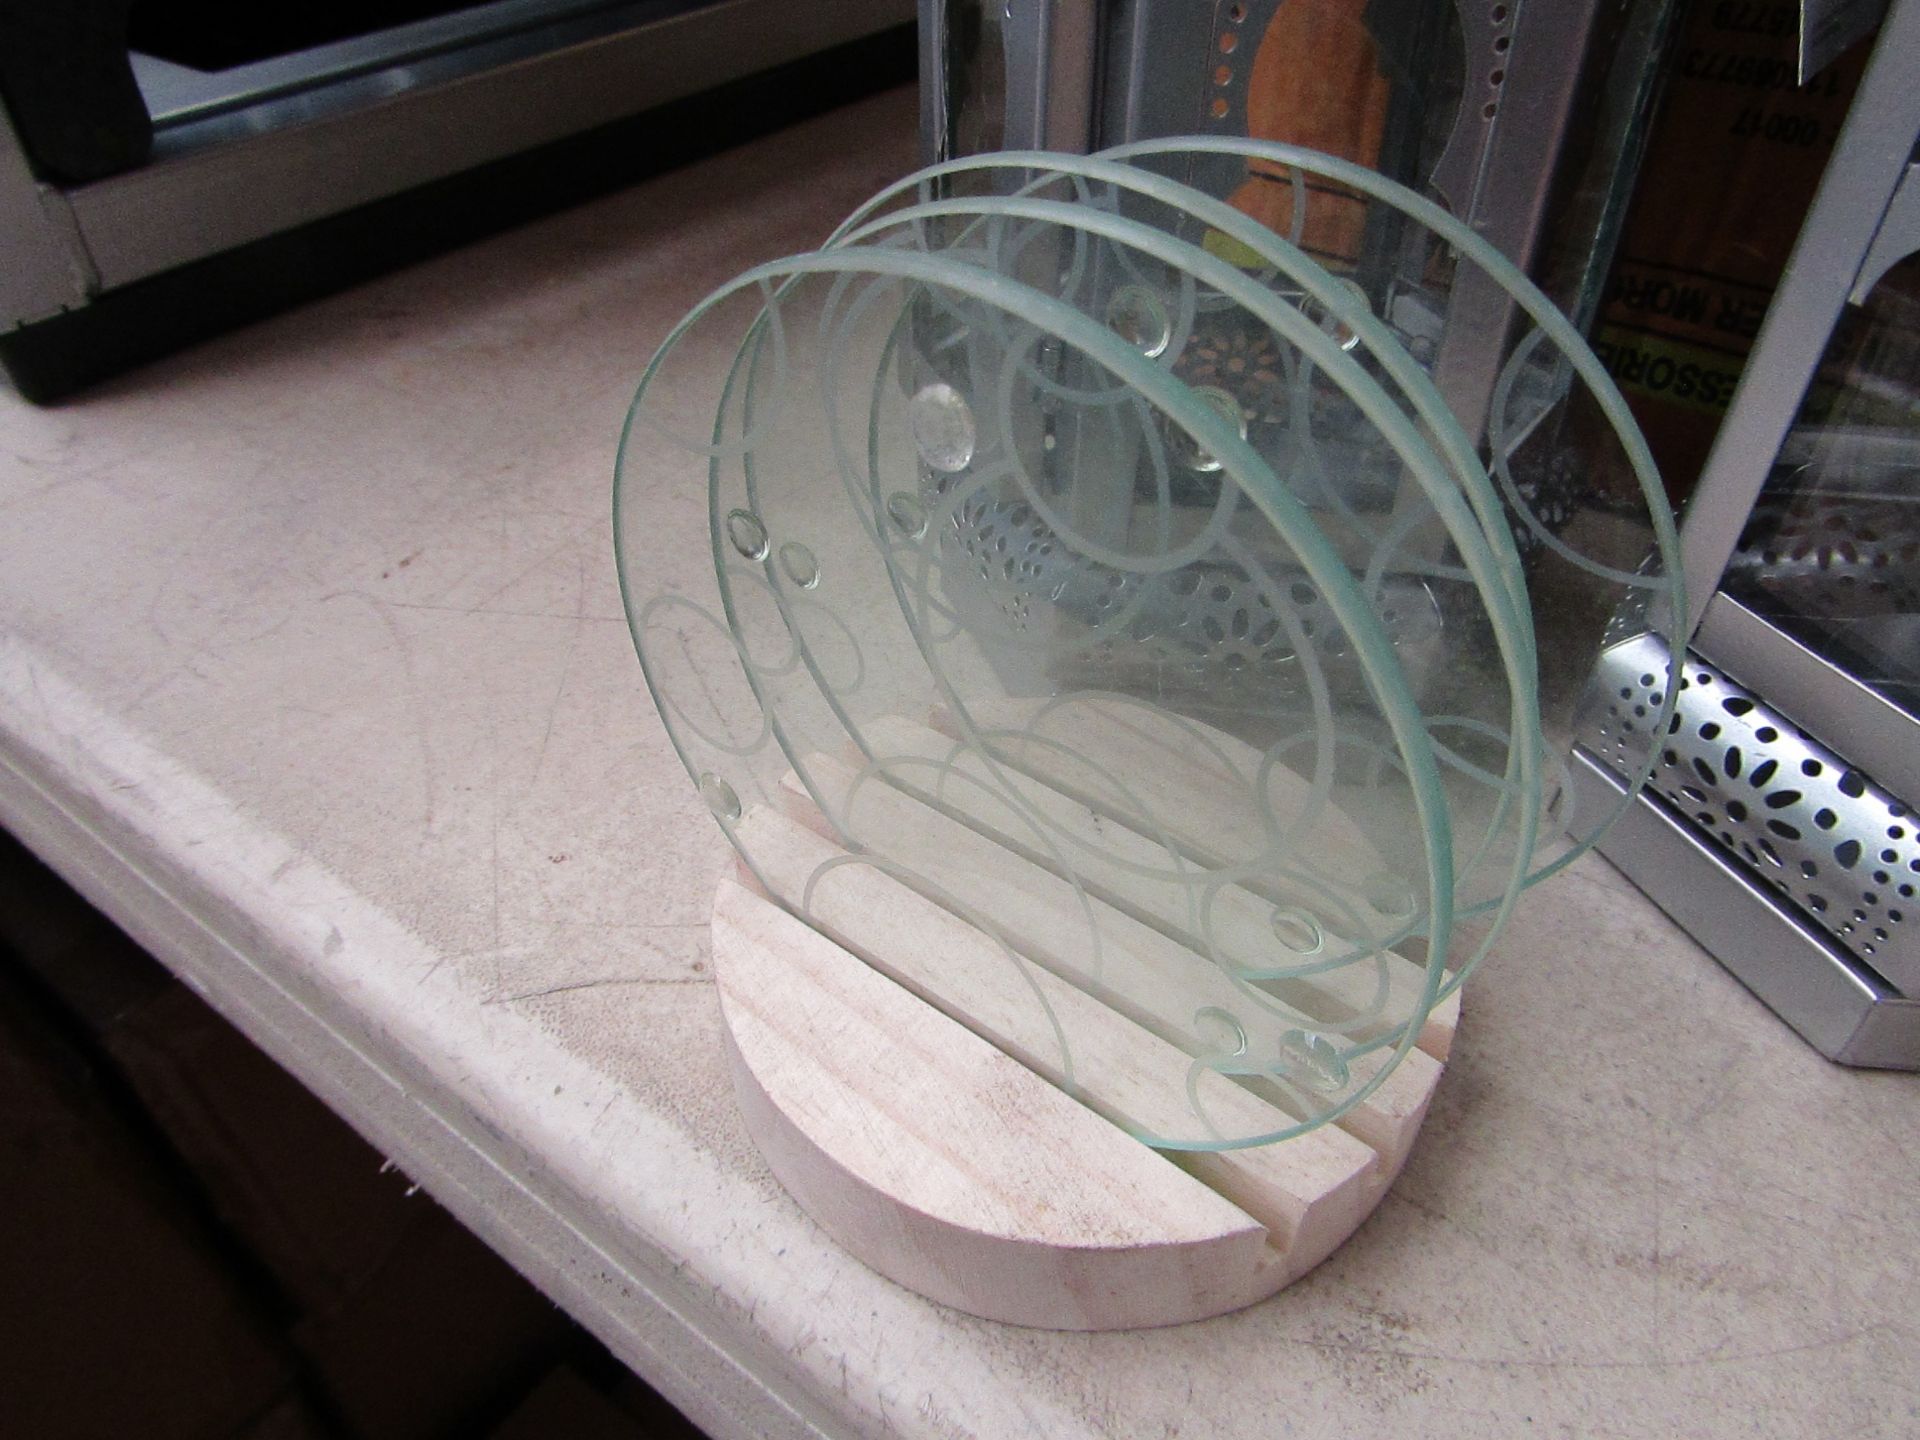 Set of 4x glass coasters with stand, new and packaged.